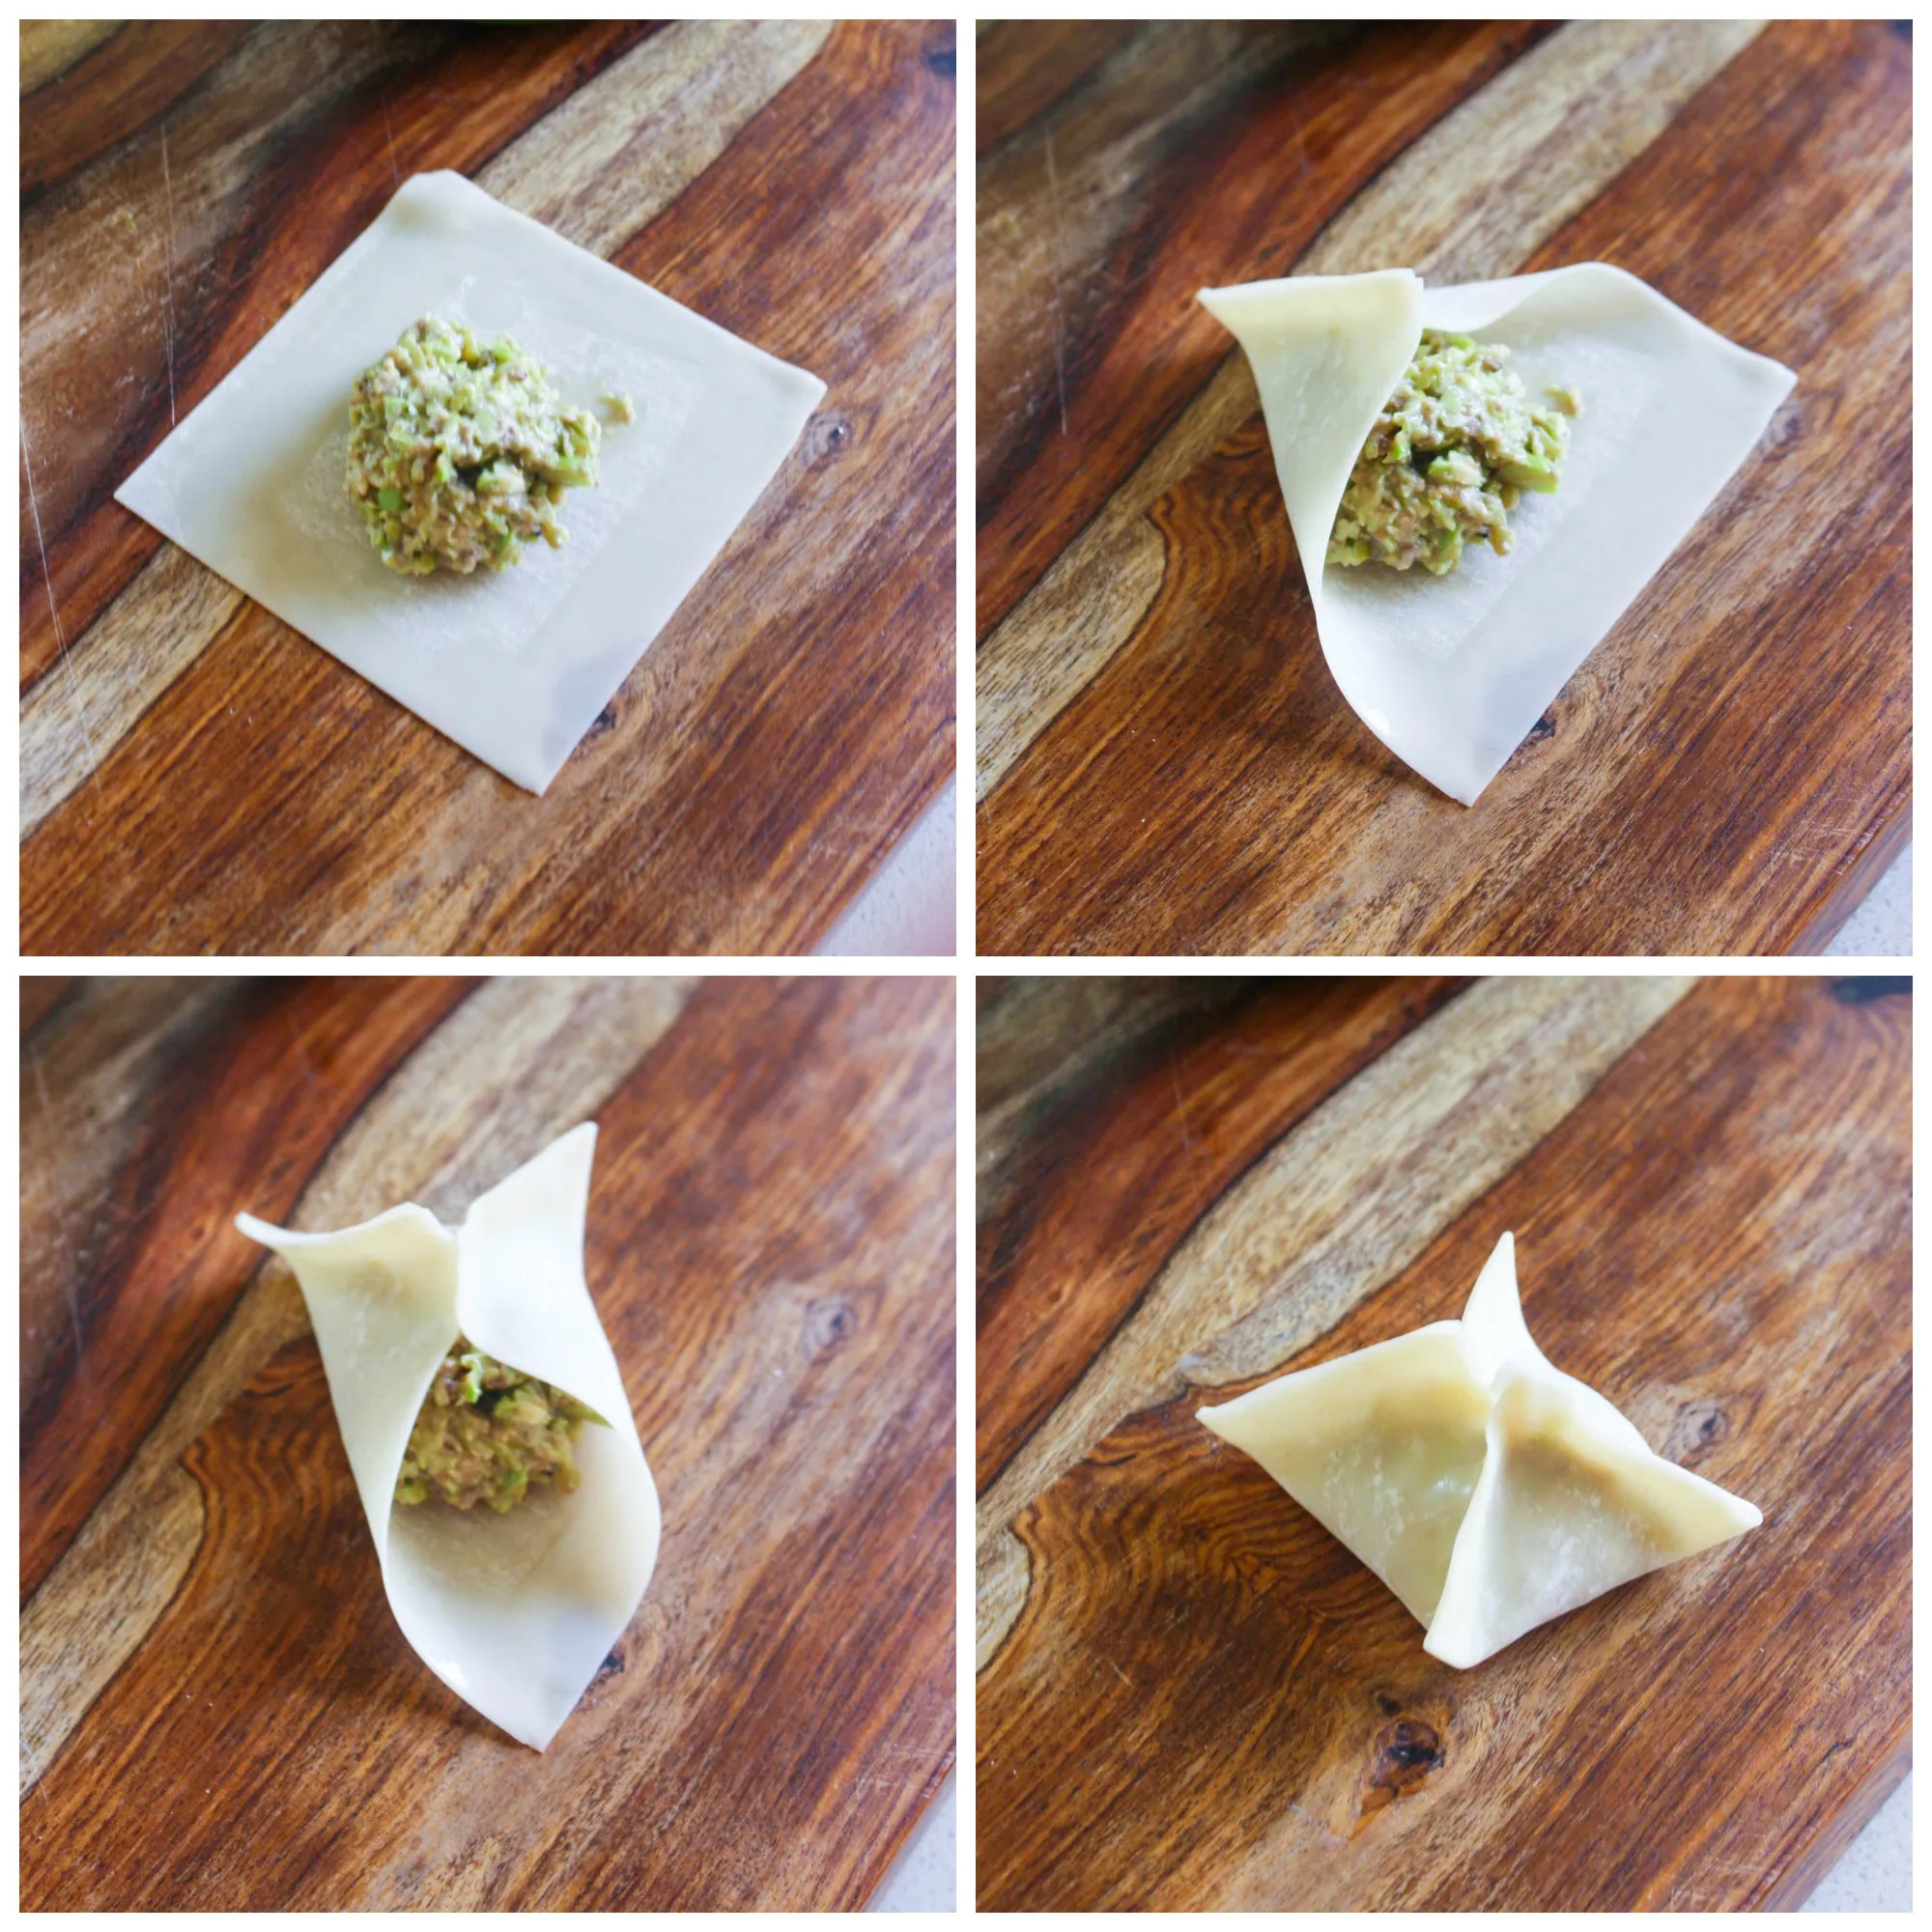 Edamame and Mushroom Potstickers with Dipping Sauce are perfect to serve as an appetizer or snack. You'll love these edamame and mushroom potstickers. They're fun and delicious!